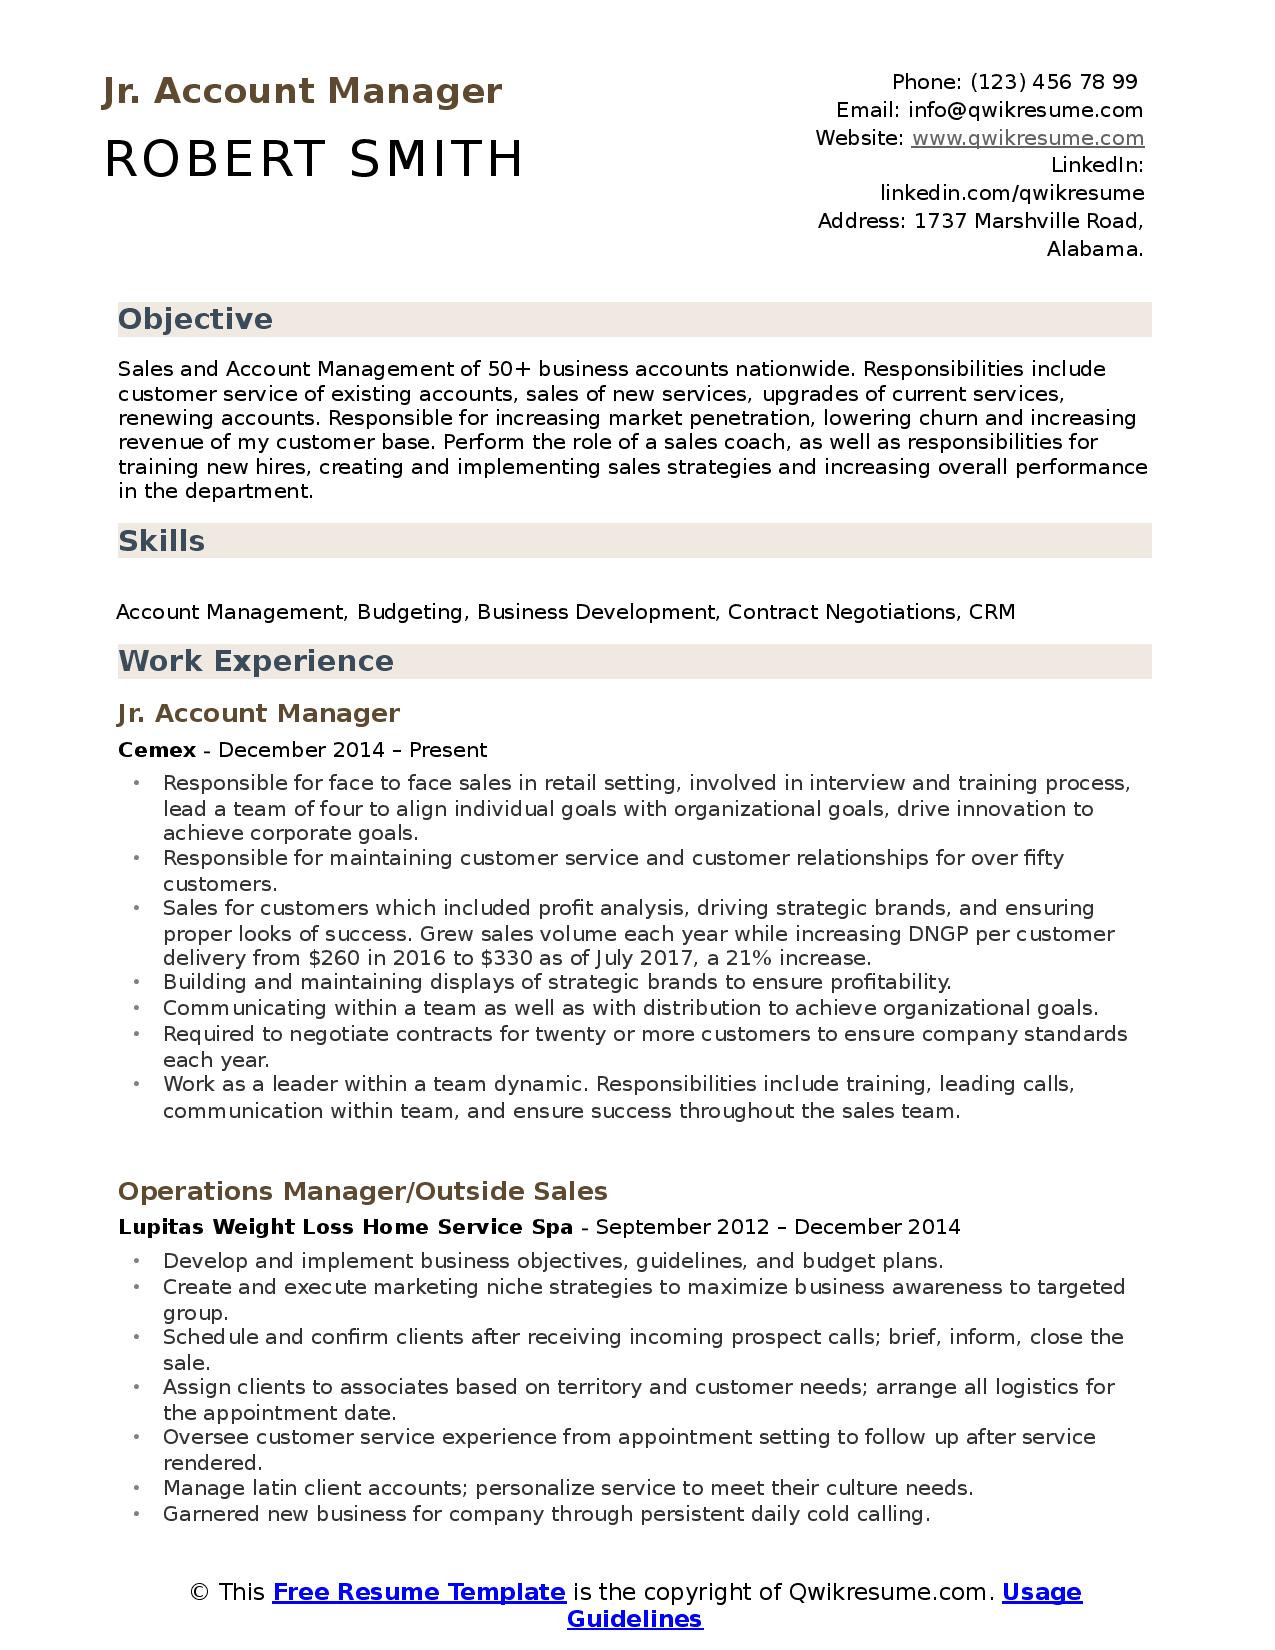 Sample Resume for Customer Service Account Manager Looking for A Great Account Manager Resume? Here You are!